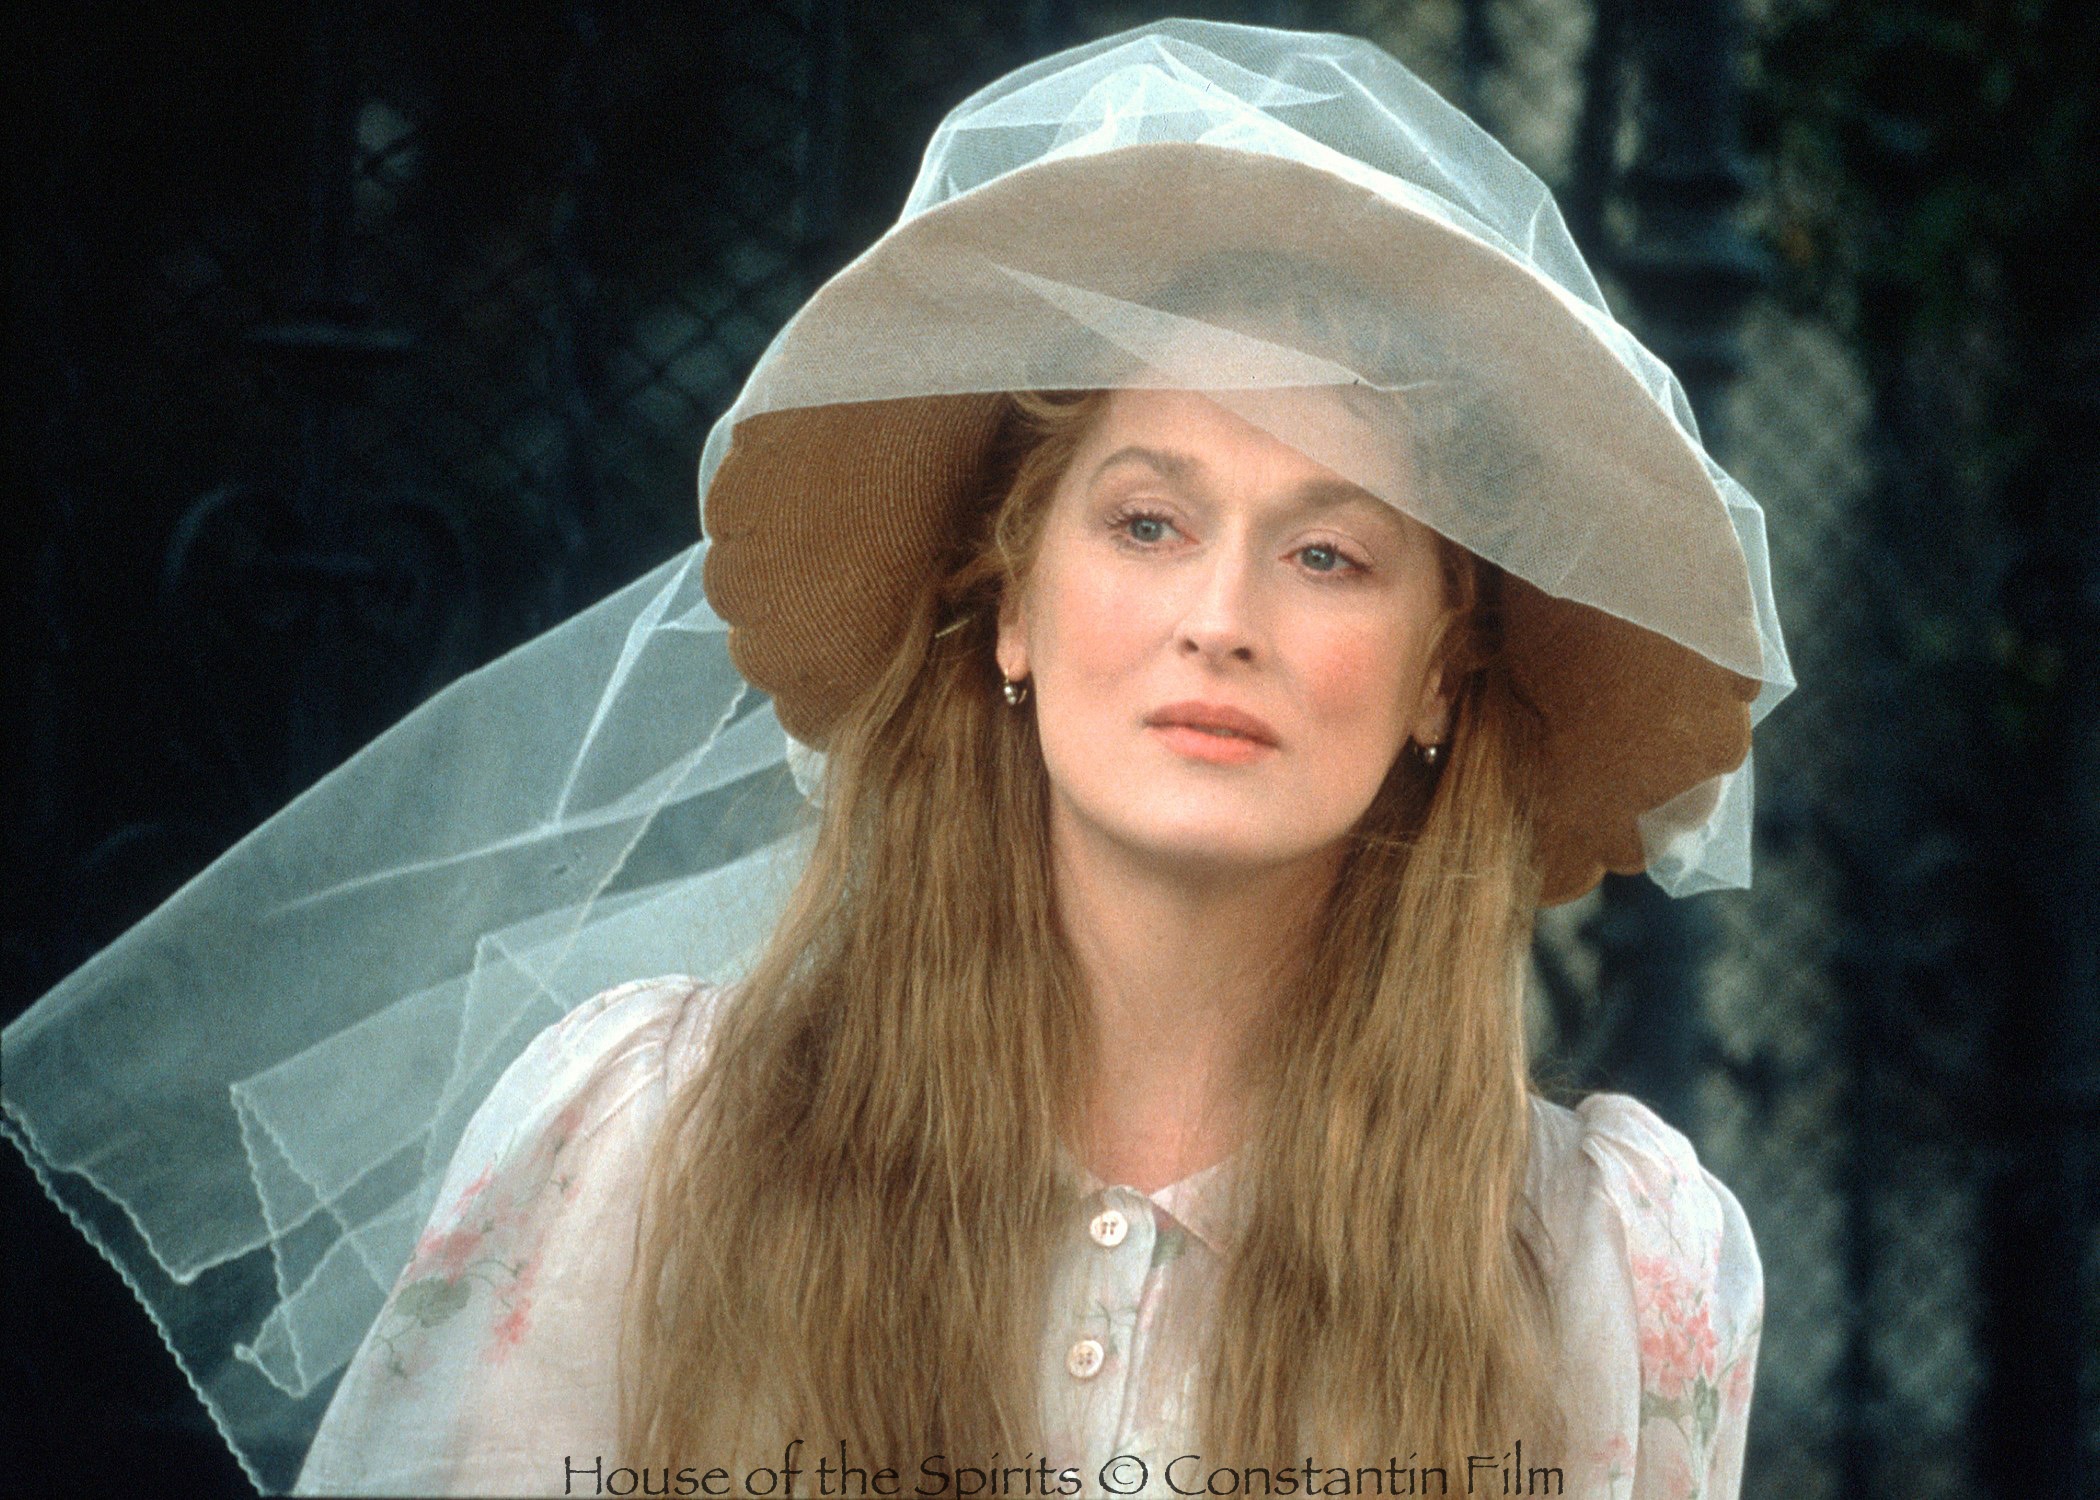 The House of the Spirits. 1993. Directed by Bille August. Meryl Streep